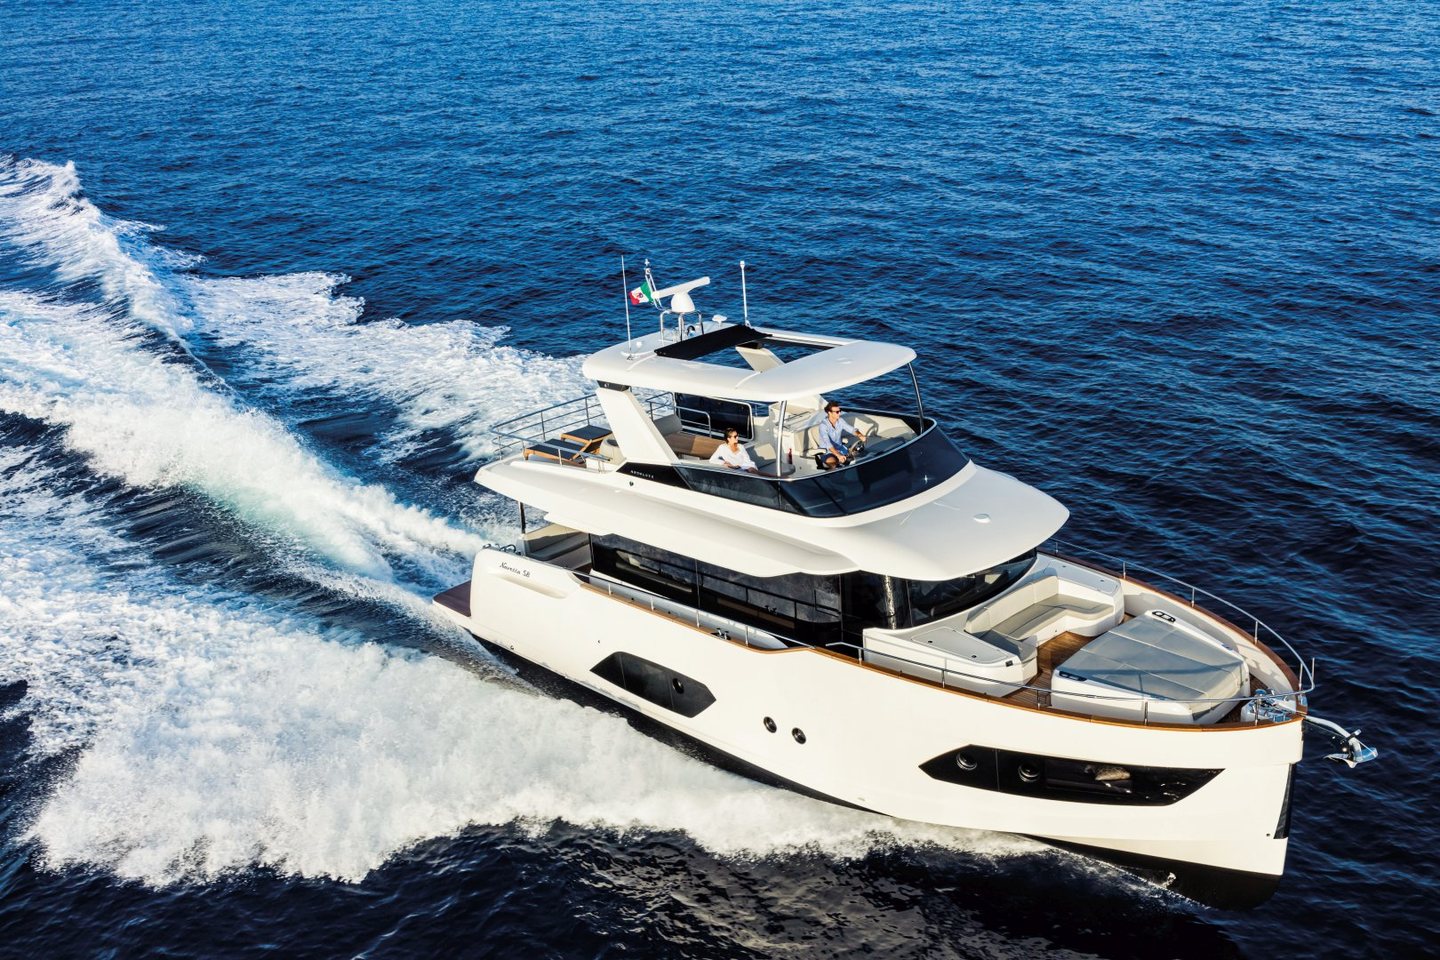 360 VR Virtual Tours of the Absolute Navetta 58